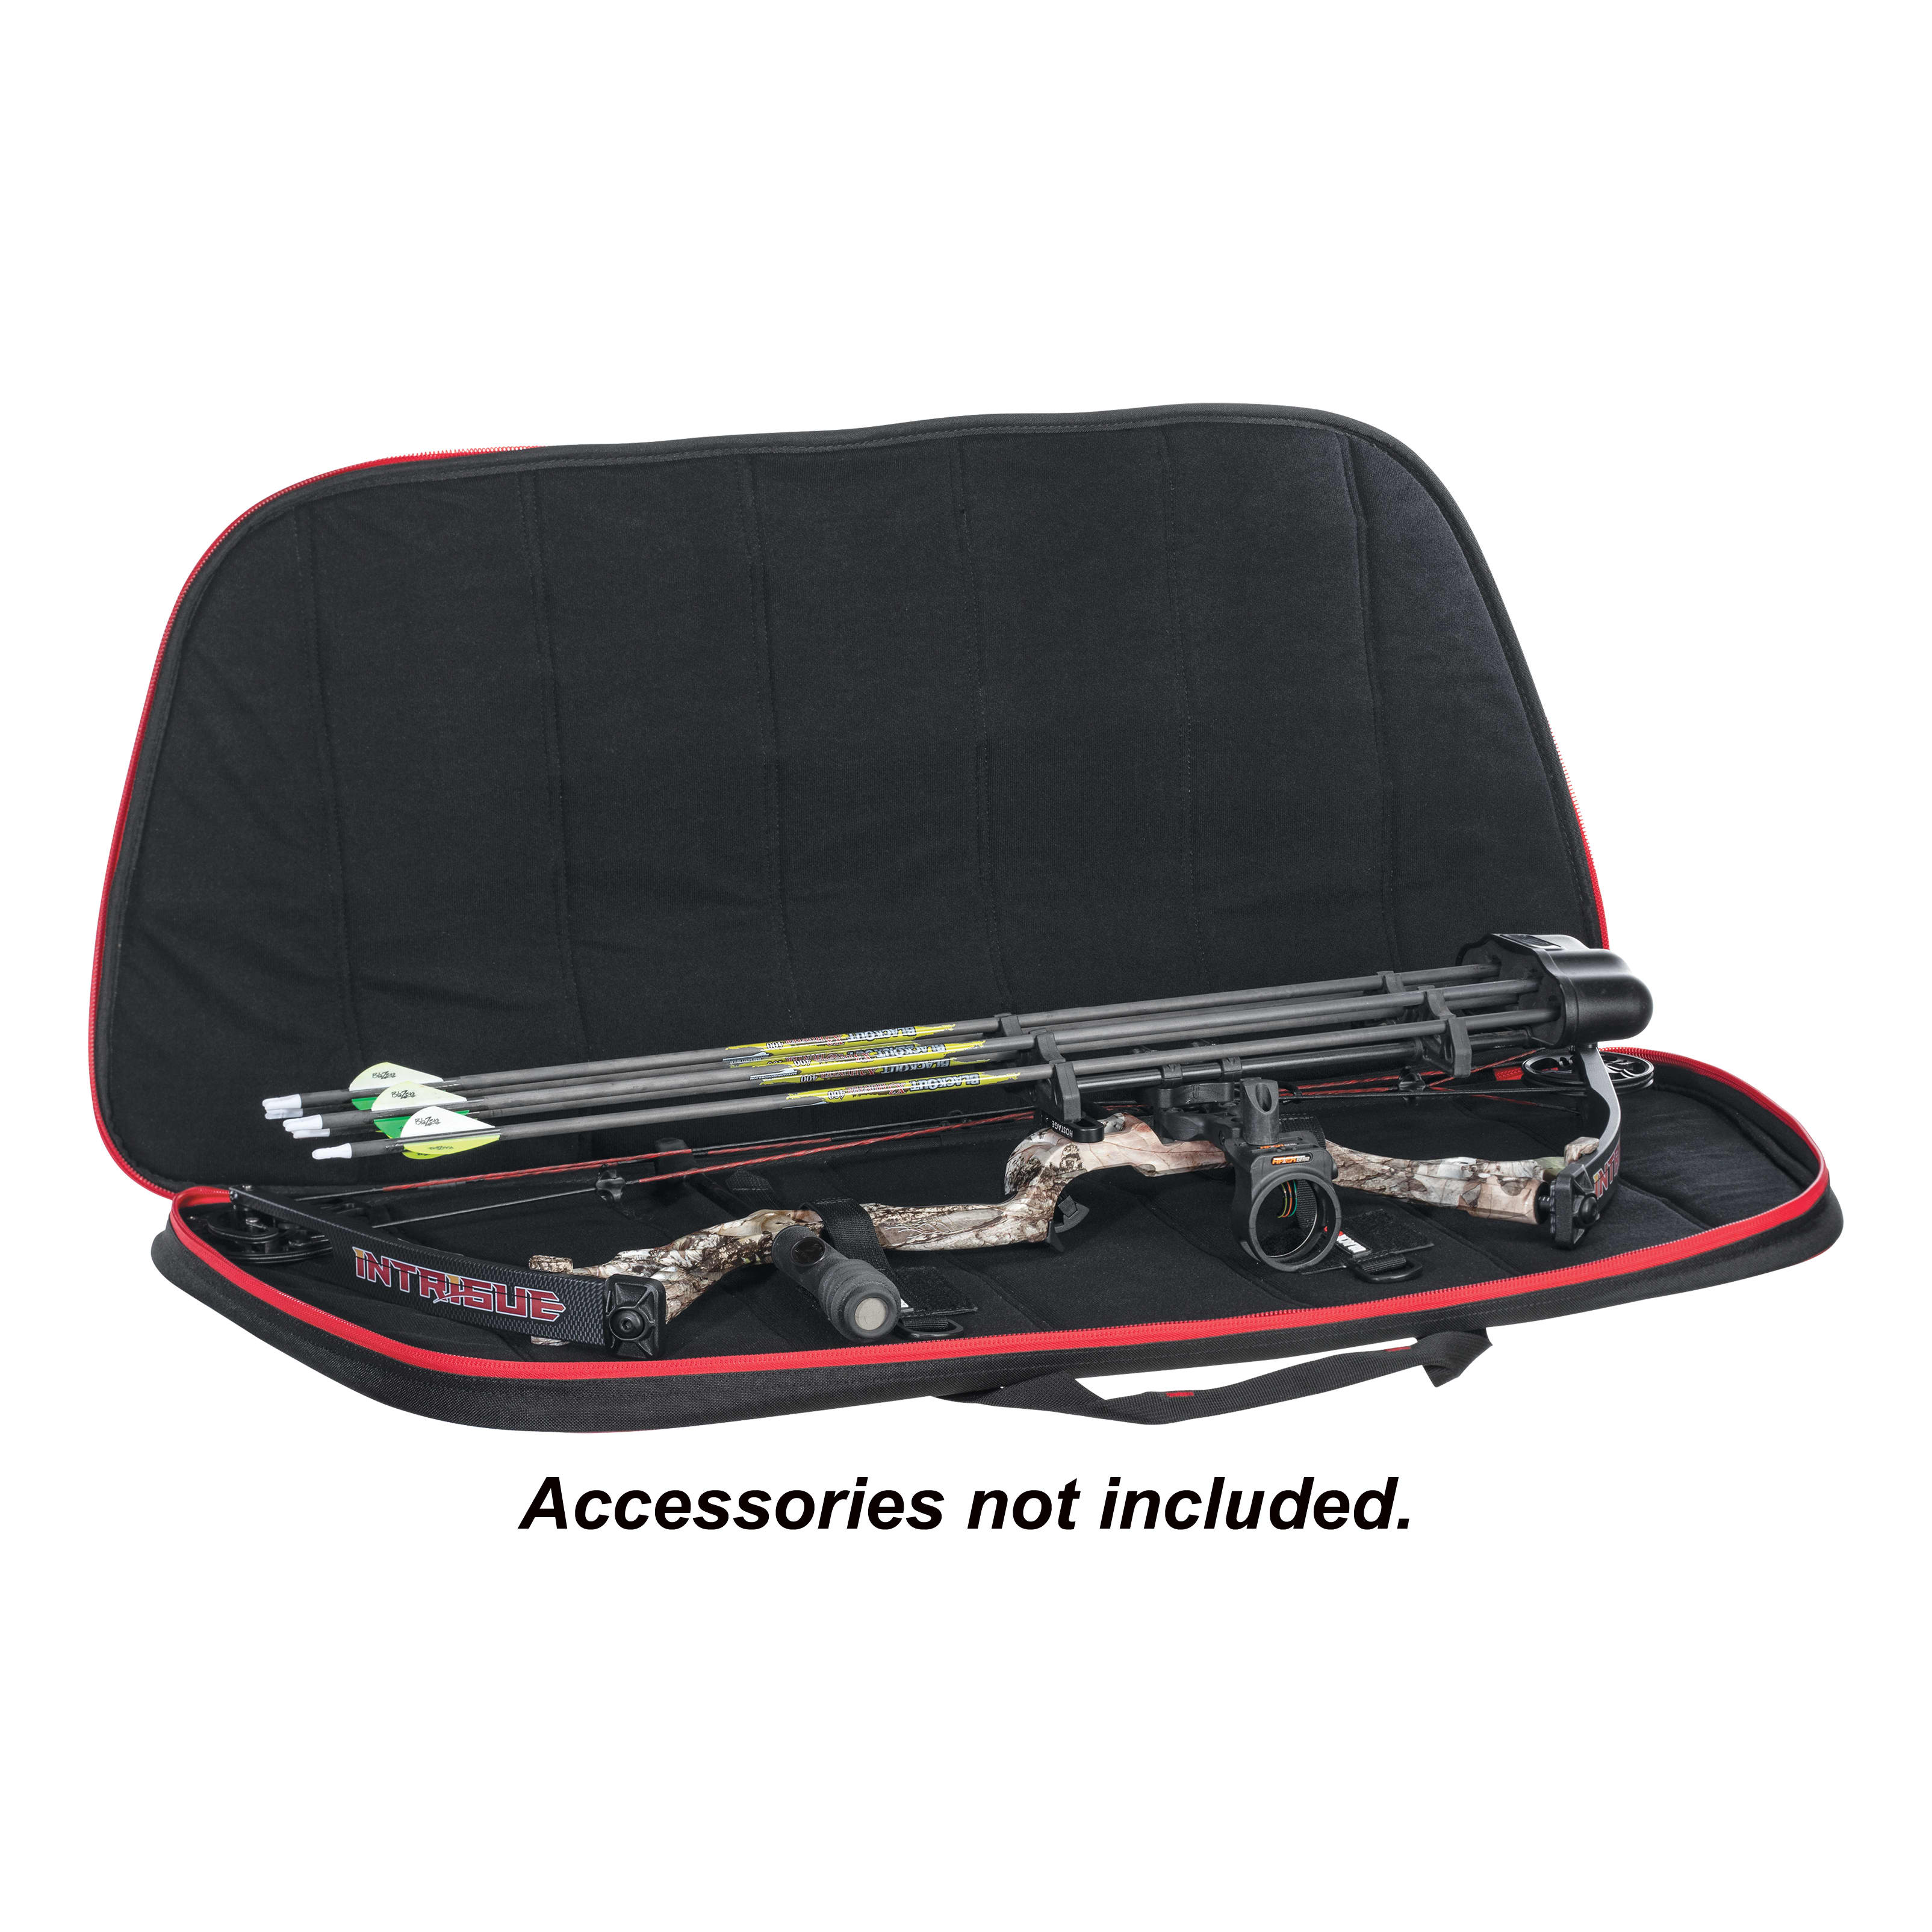 BlackOut® 1.0S Compound-Bow Case - Black/Red - Open View